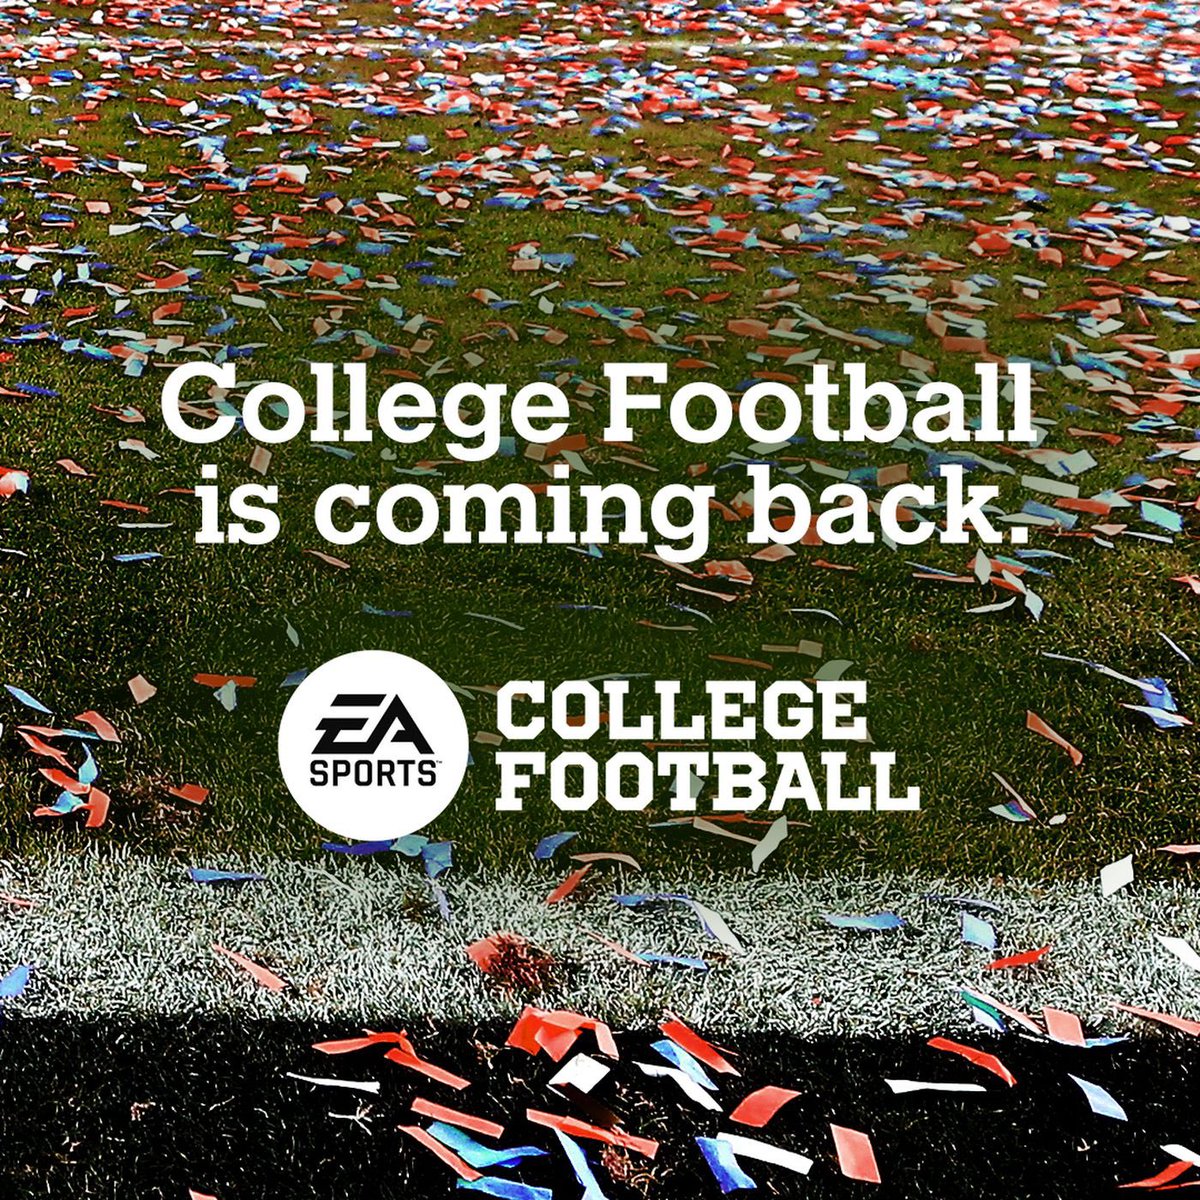 𝗕𝗥𝗘𝗔𝗞𝗜𝗡𝗚: EA Sports College Football is planned to launch on July 12, 2024, per @GatorDave_SEC 🔥 Finally, we have a date!